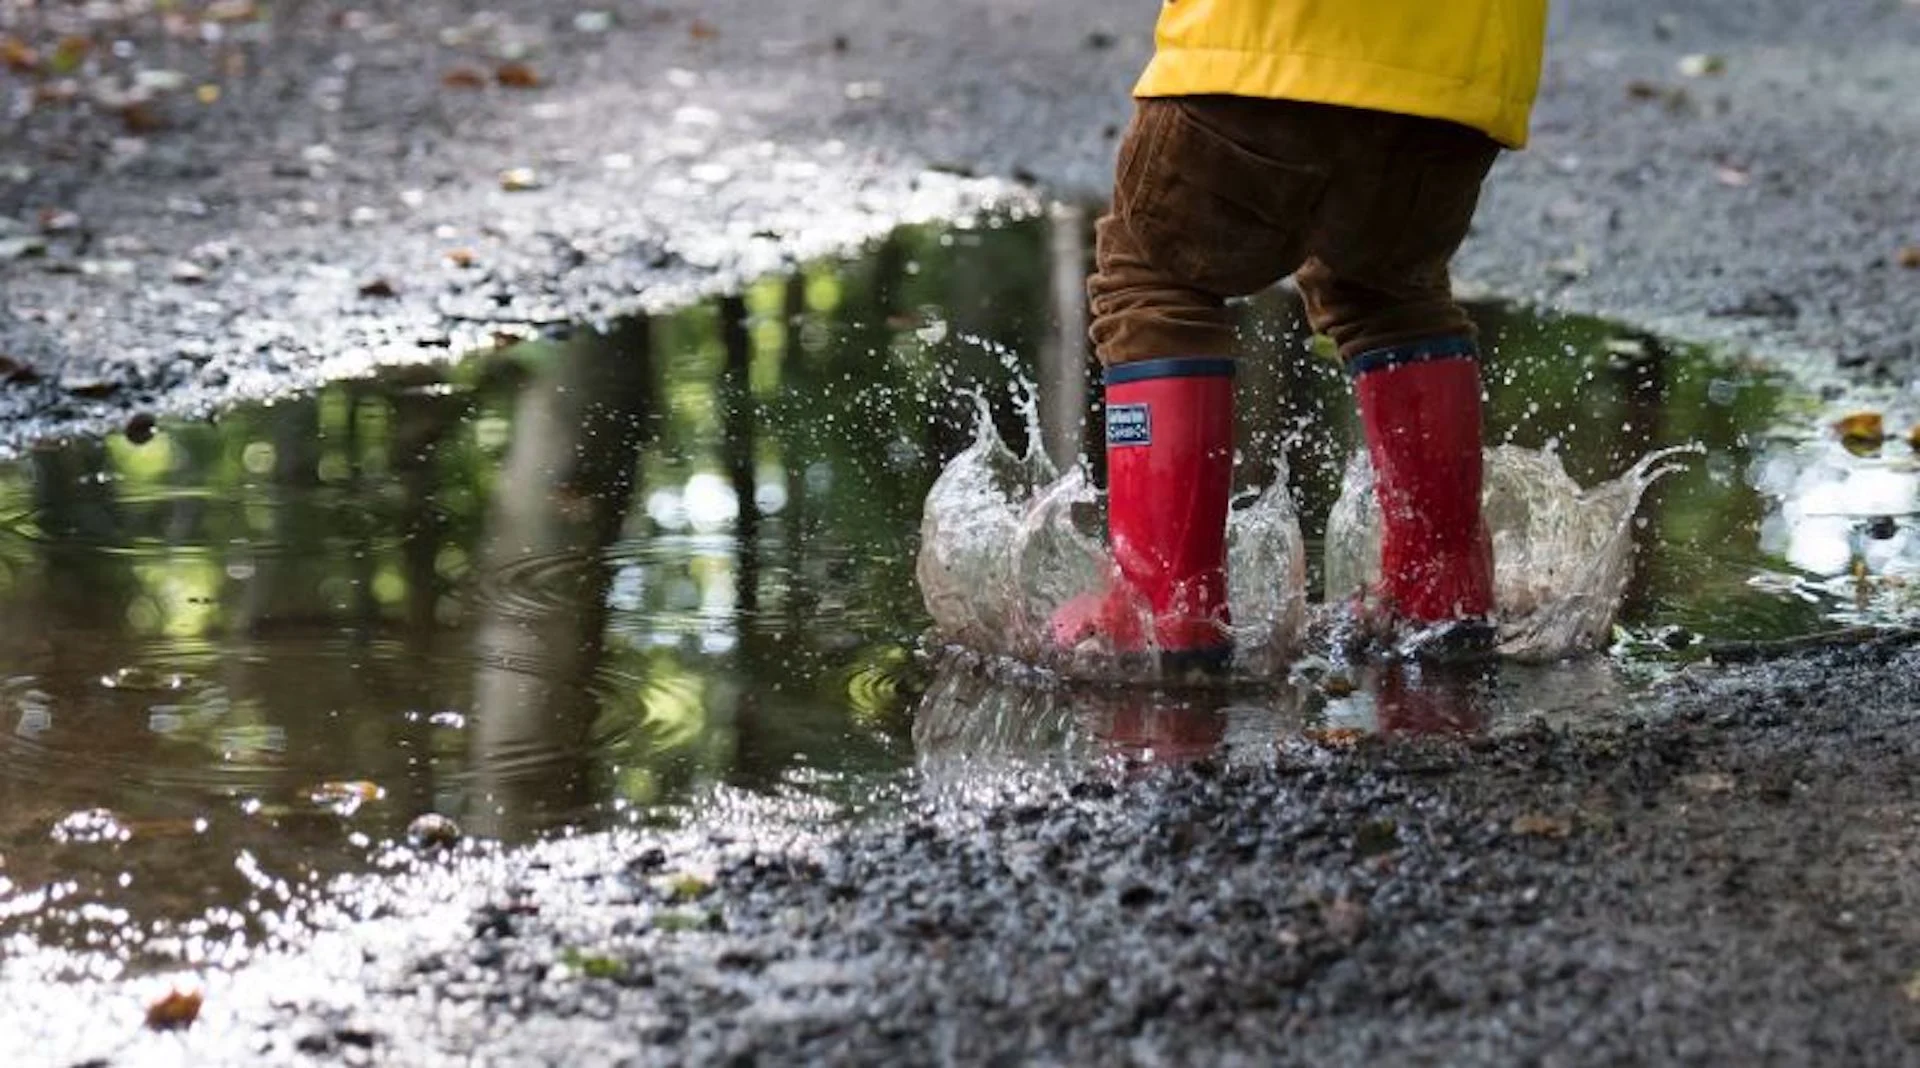 Rain gear your kids can make a splash in this spring